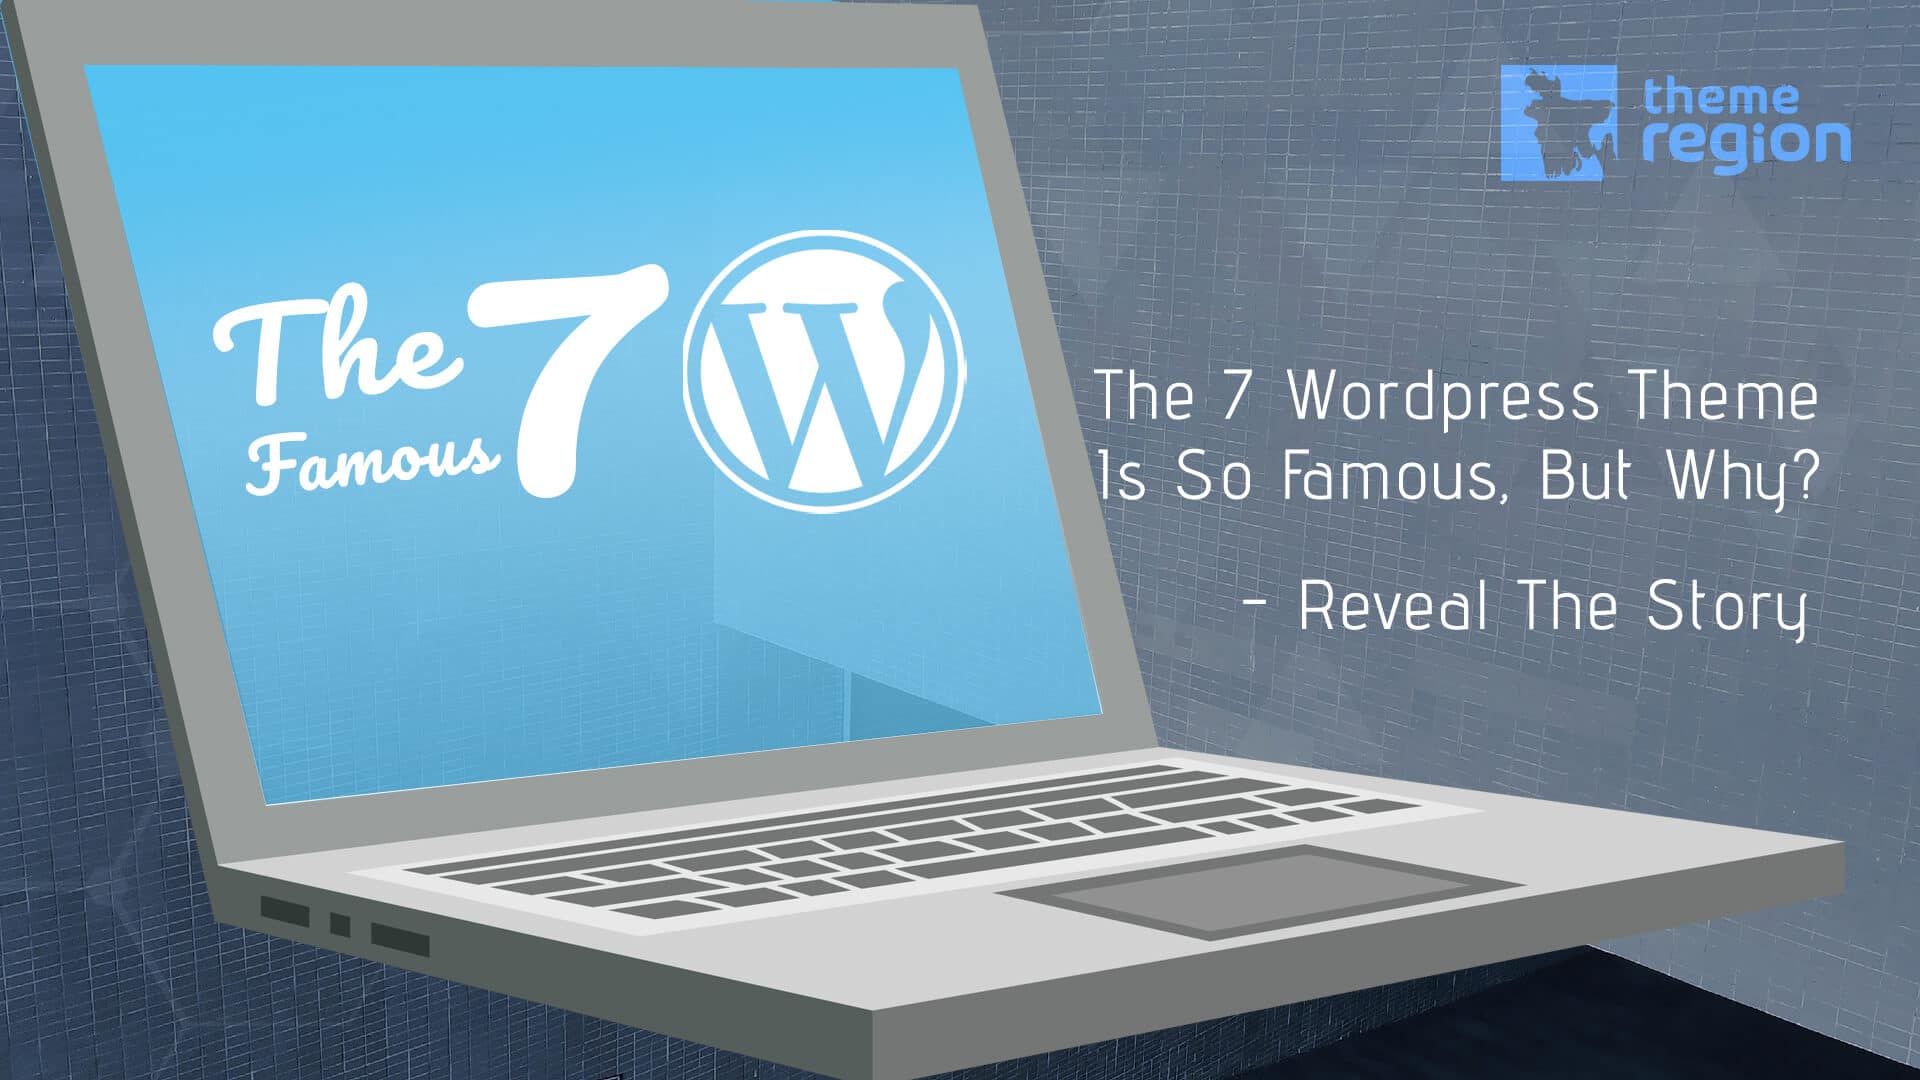 The 7 WordPress Theme Is So Famous, But Why? – Reveal The Story